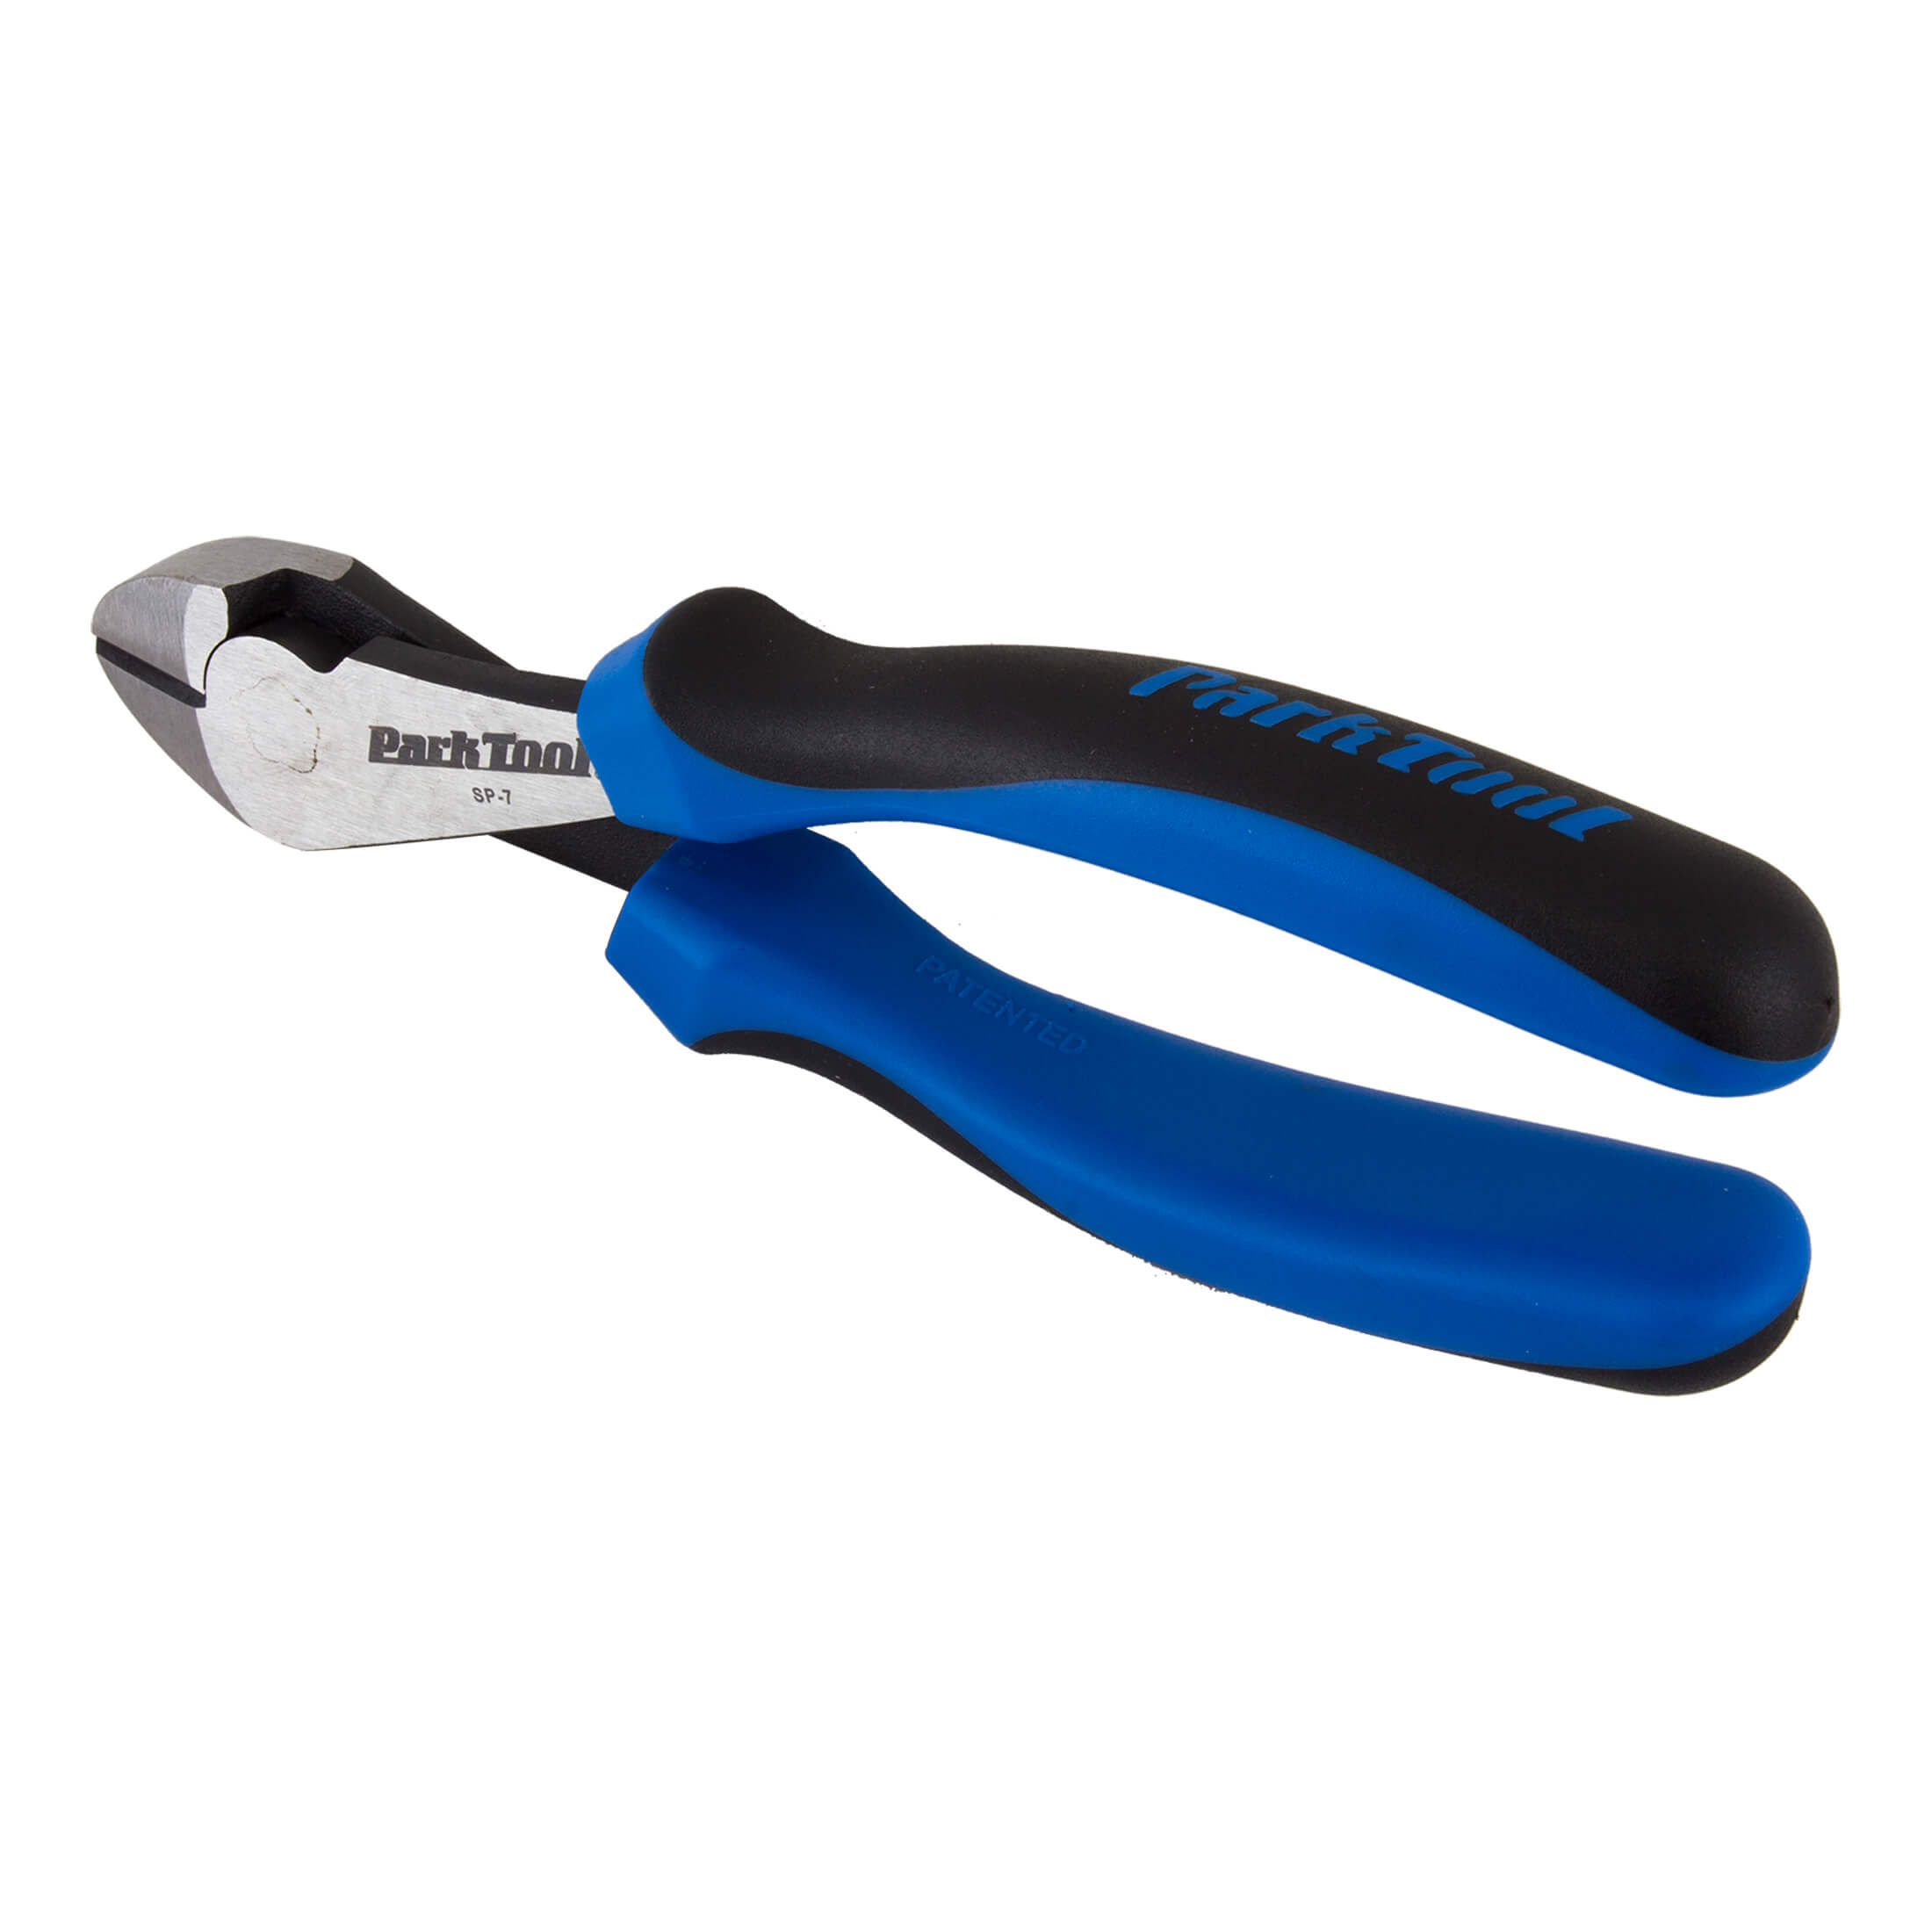 Park Tool SP-7 Side Cutter Pliers - The Bikesmiths